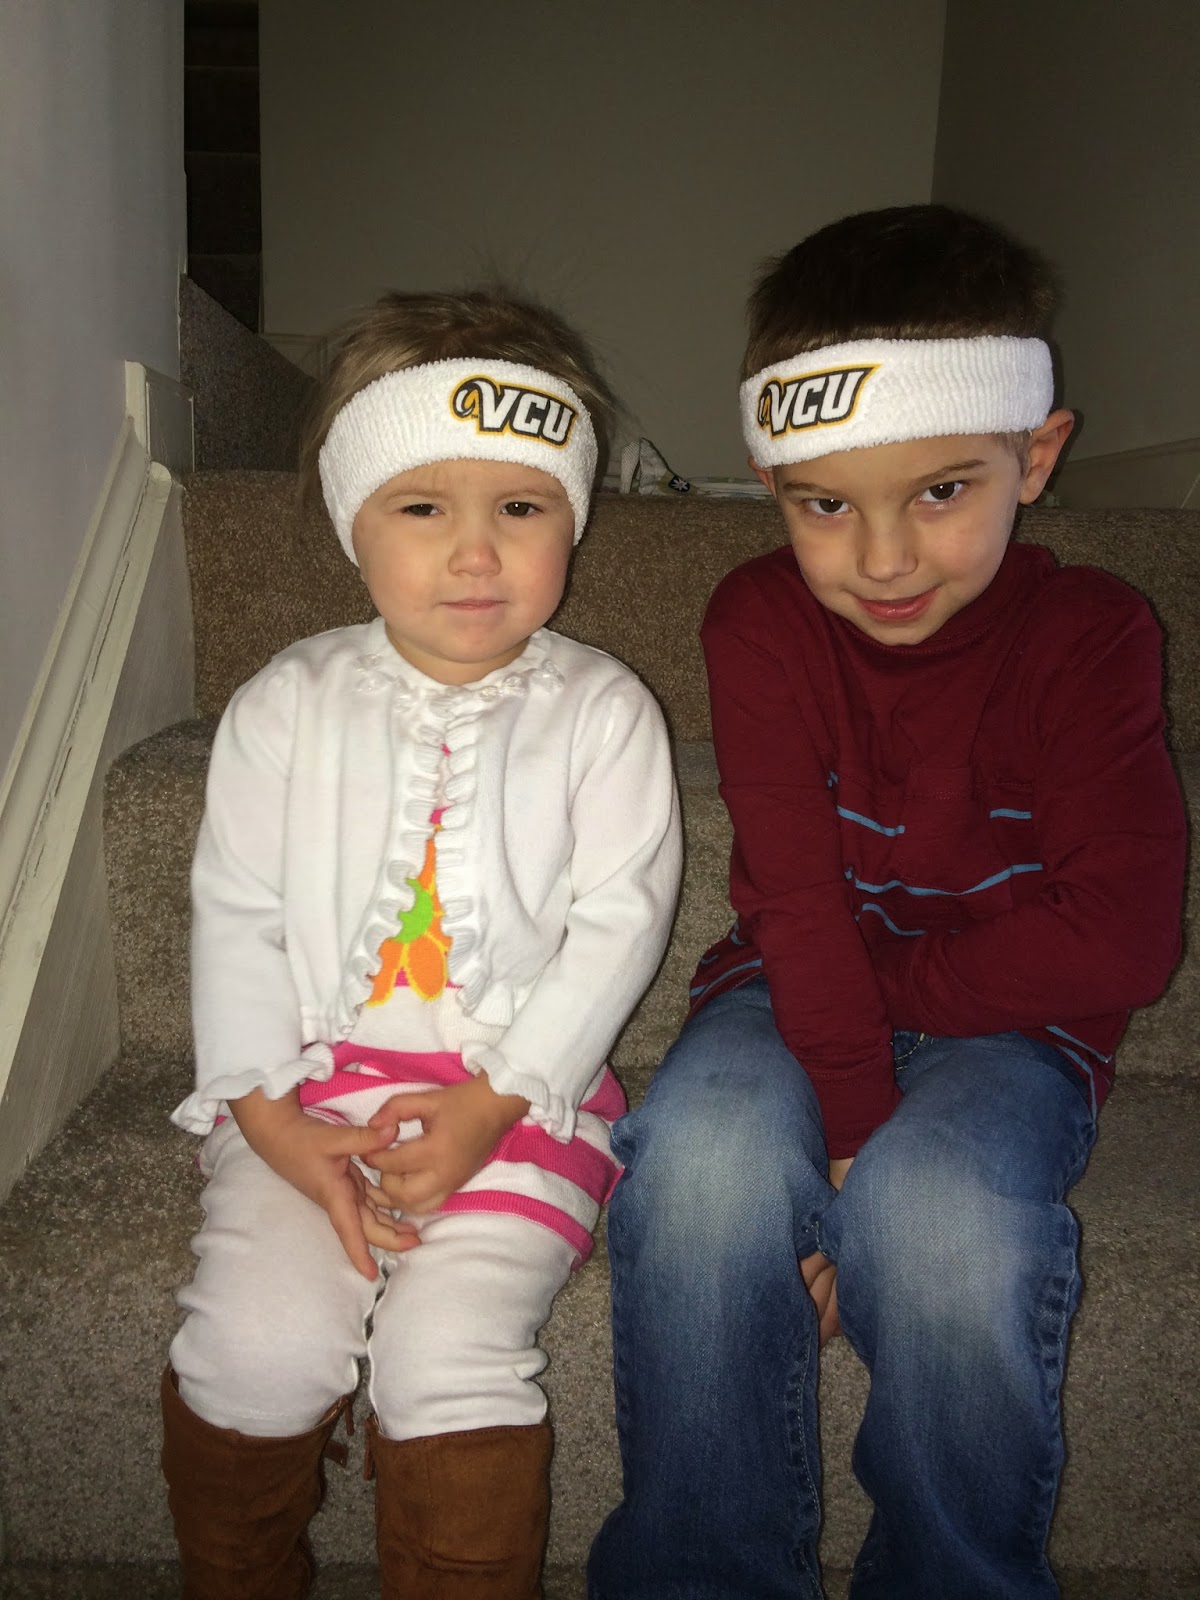 Luckily the sweatbands came off before their performance during church ...